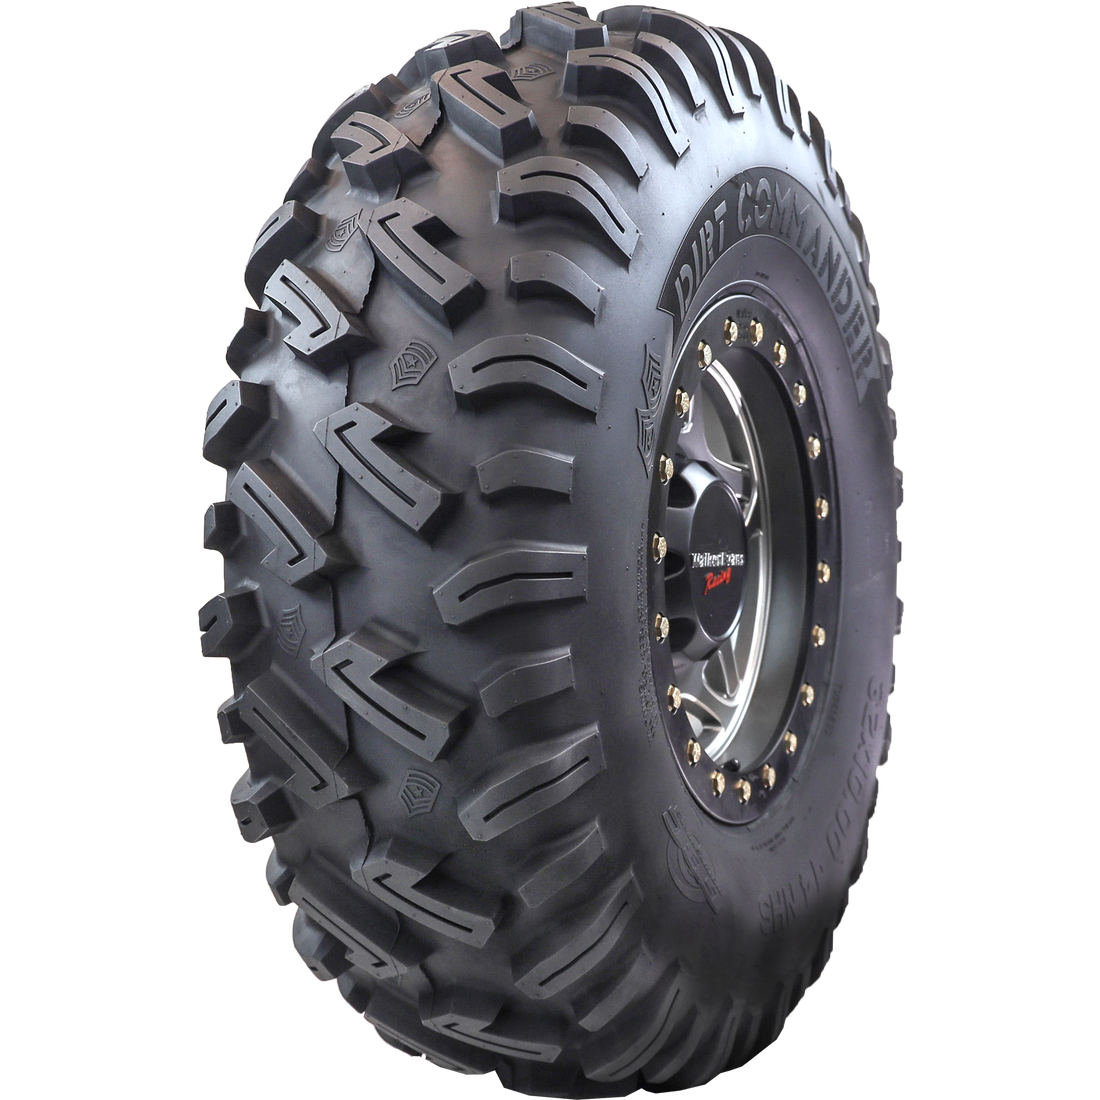 Angle view of the durable, high-performance Dirt Commander tire, highlighting its aggressive tread design and resilient sidewall lugs, specifically engineered for SXS and ATV off-road vehicles.